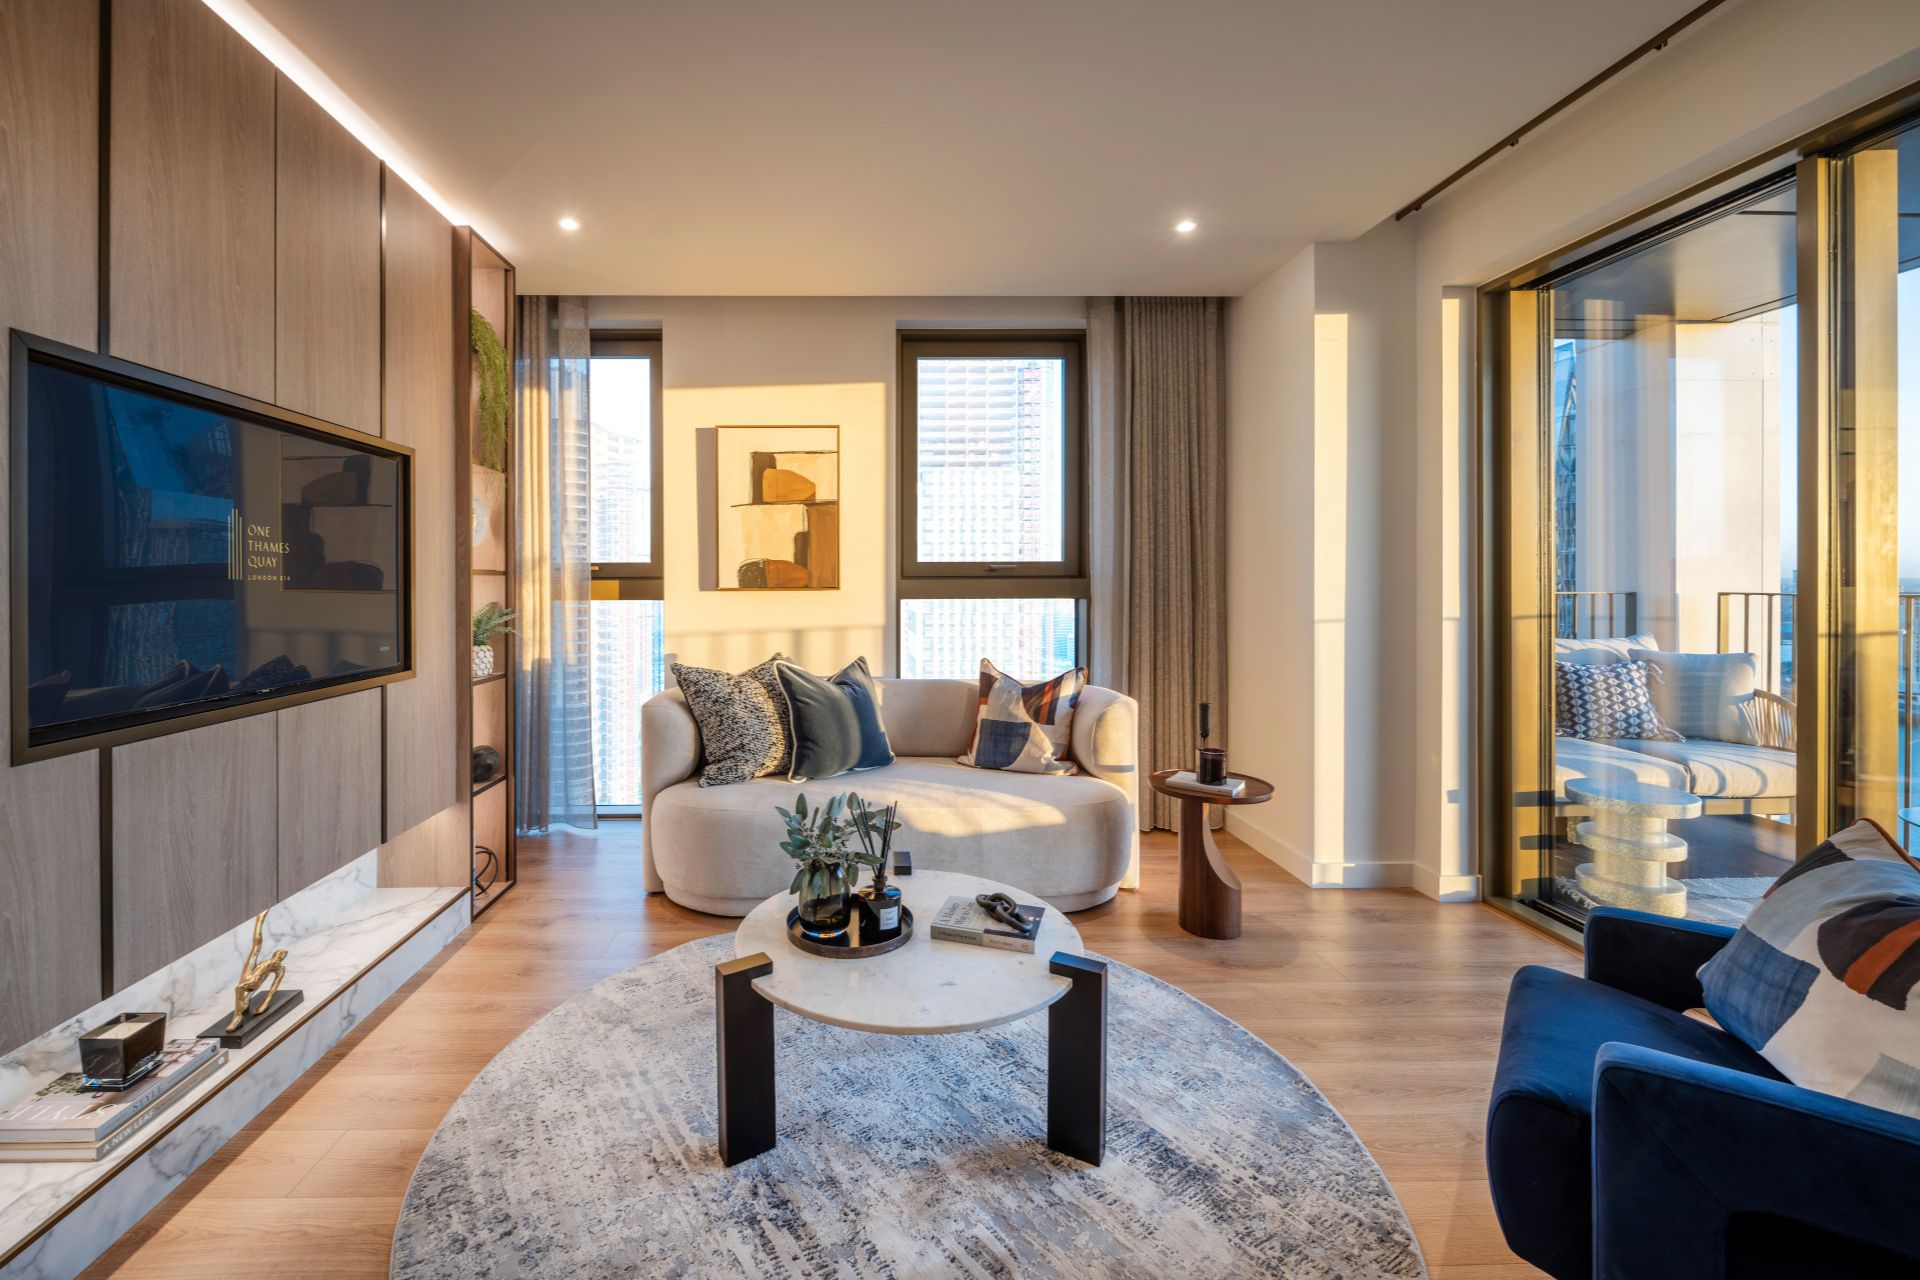 Show apartment at One Thames Quay